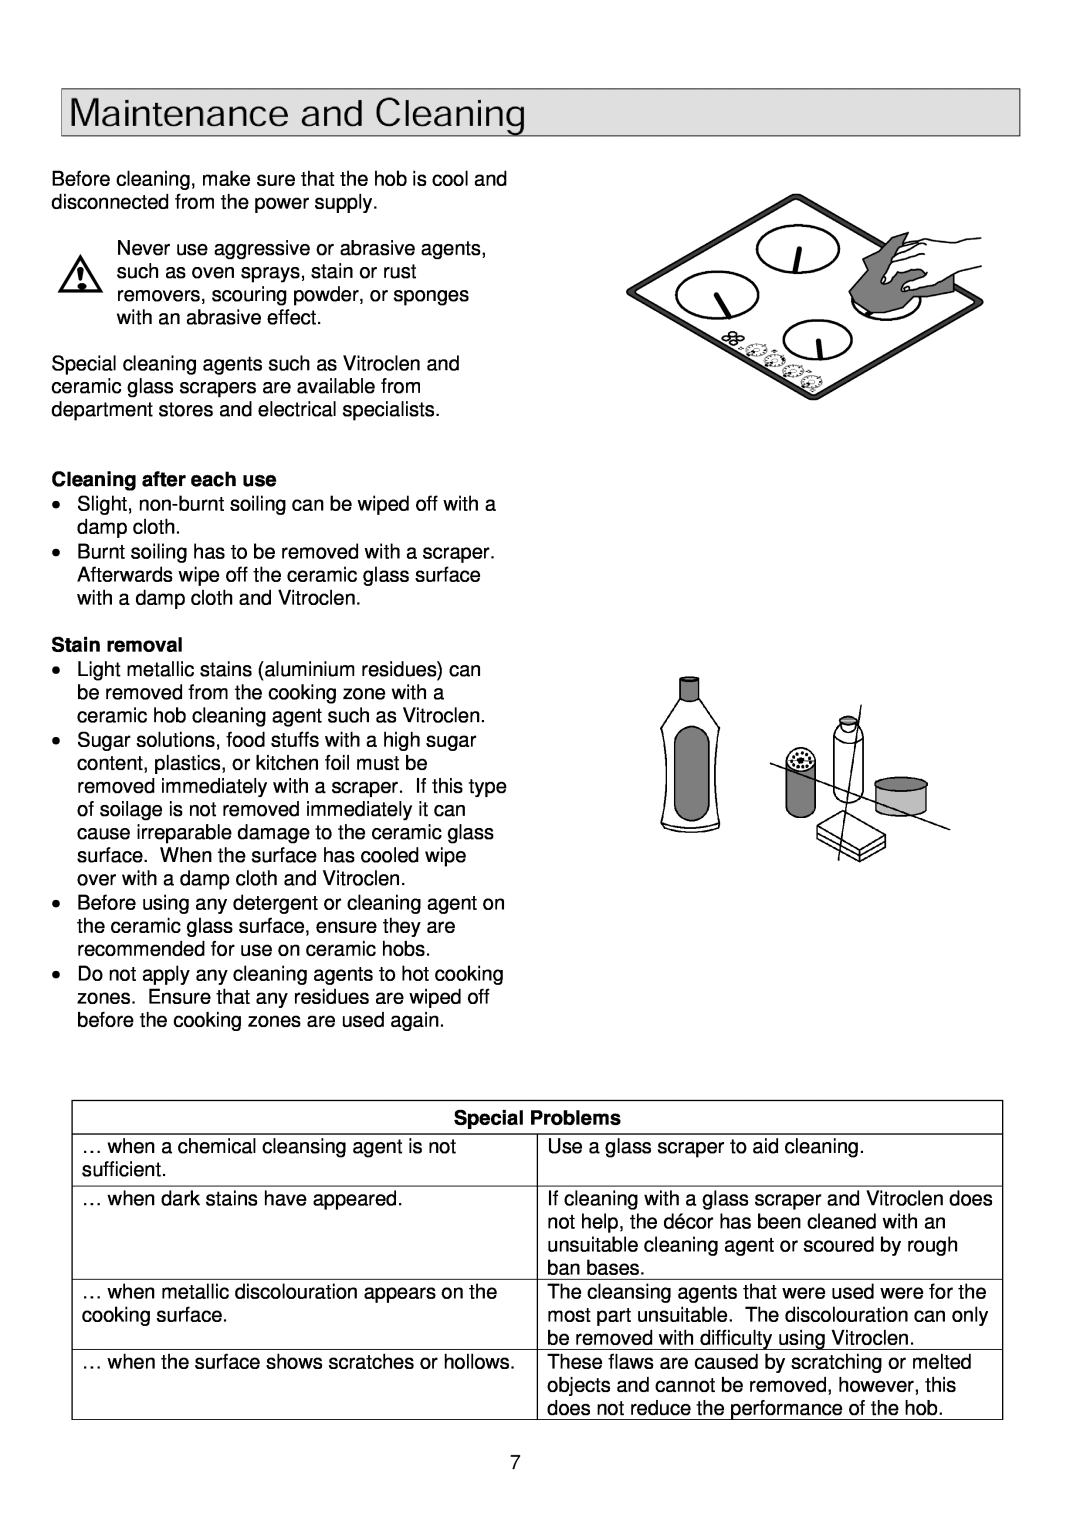 Zanussi ZKF641 installation instructions Cleaning after each use, Stain removal, Special Problems 